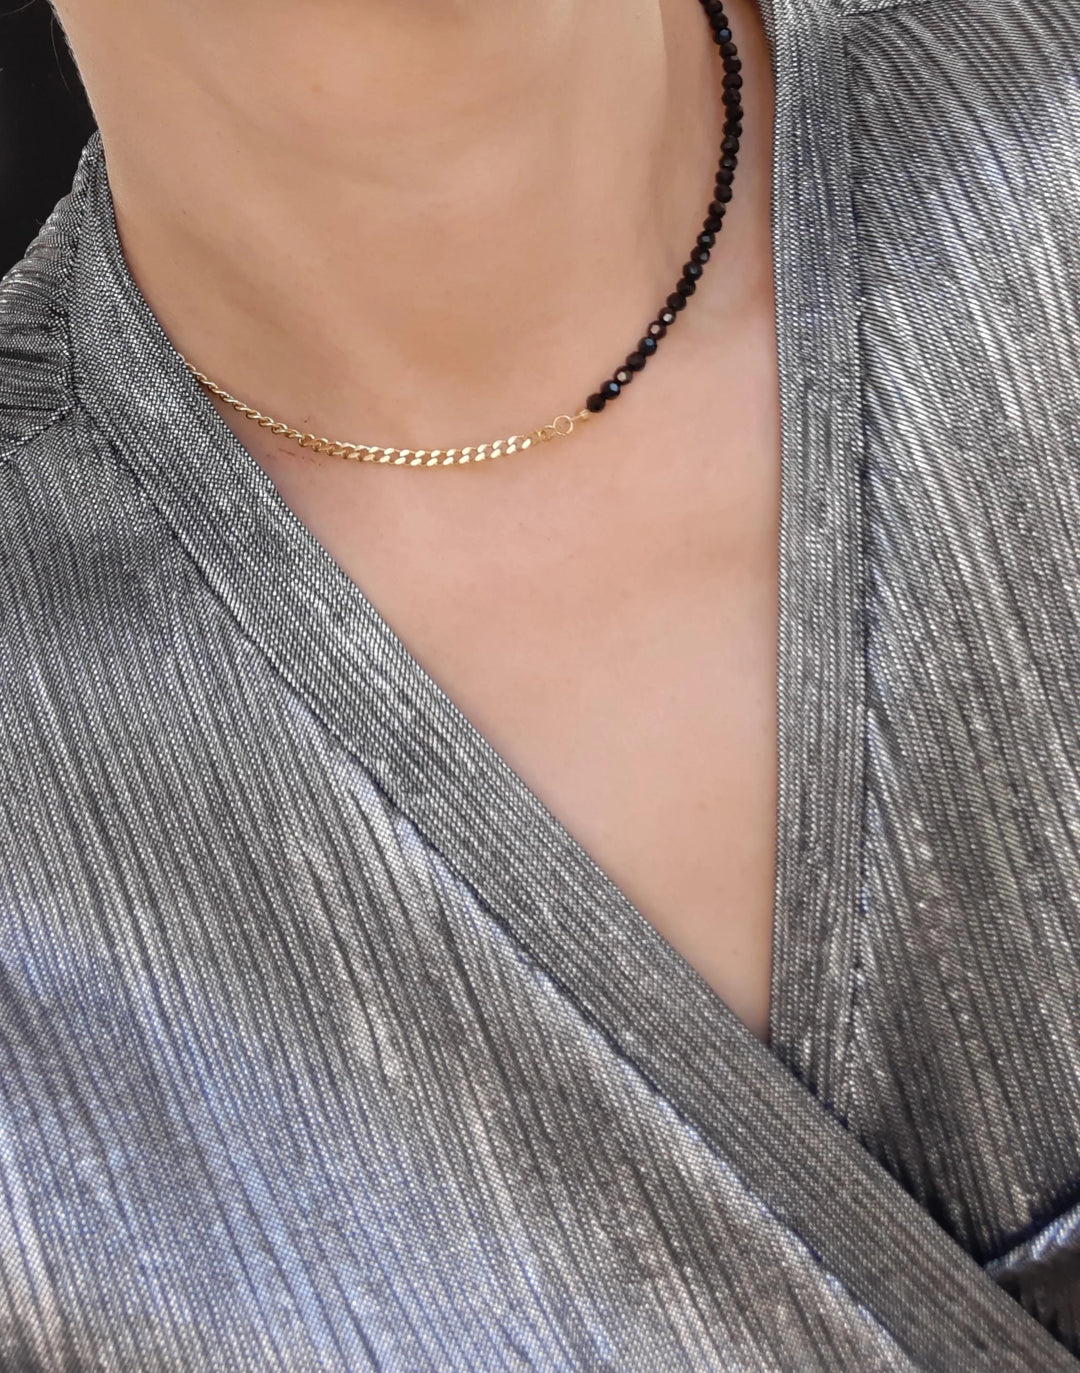 Black Spinel Gold Chain Necklace